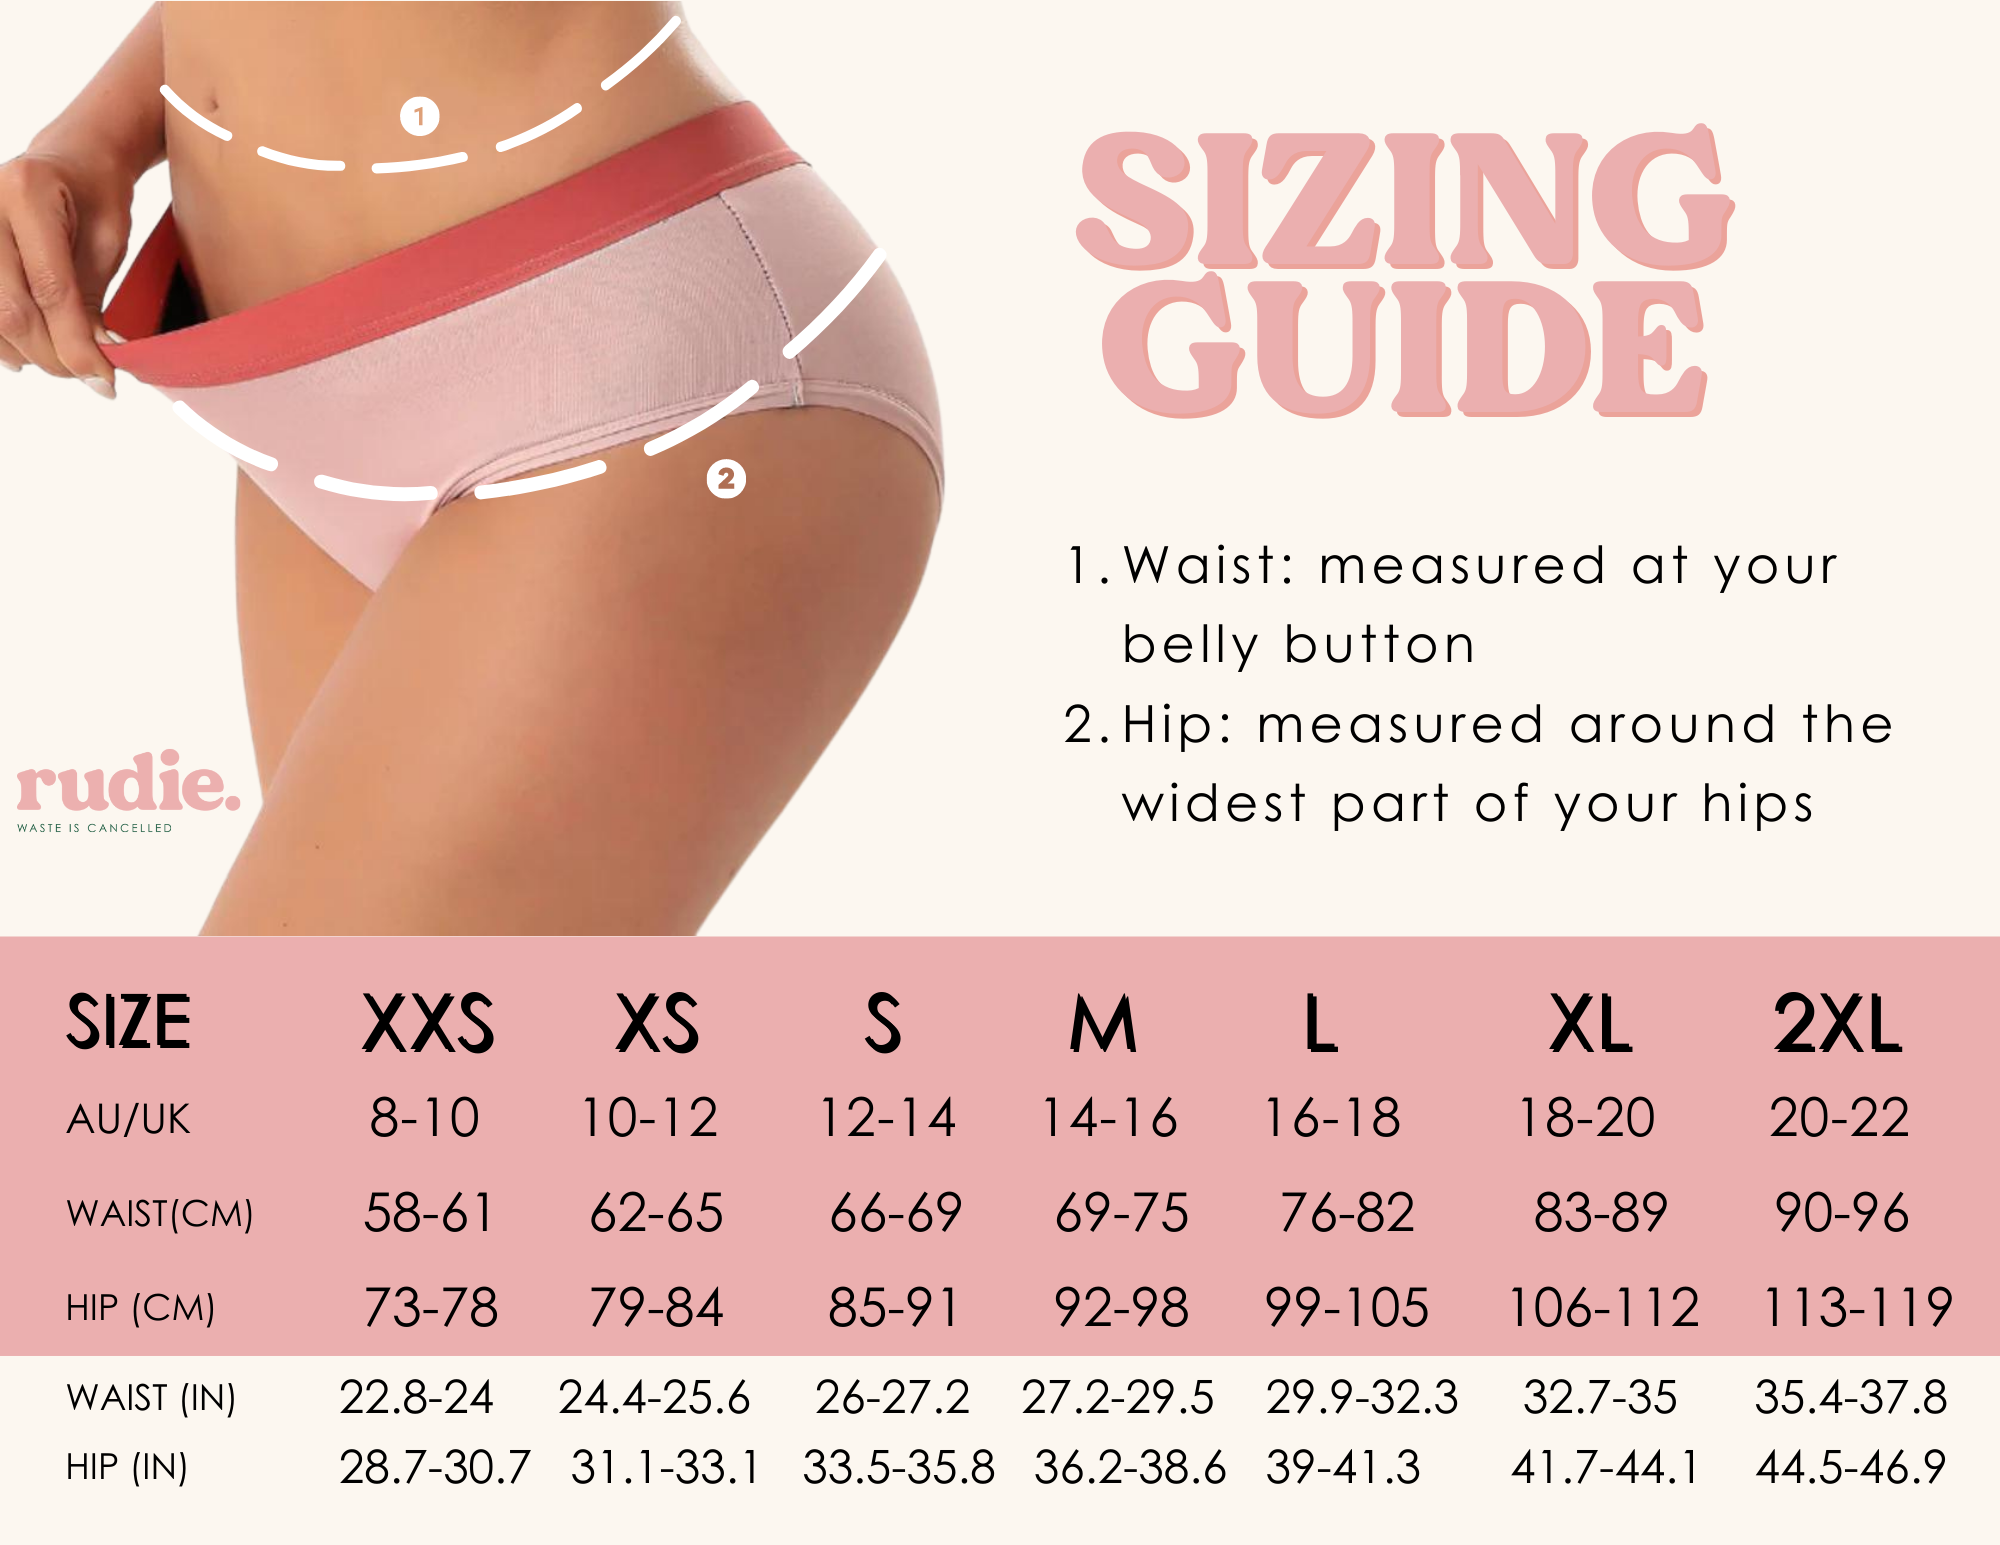 How Often to Change Period Underwear: A Complete Guide – AllMatters